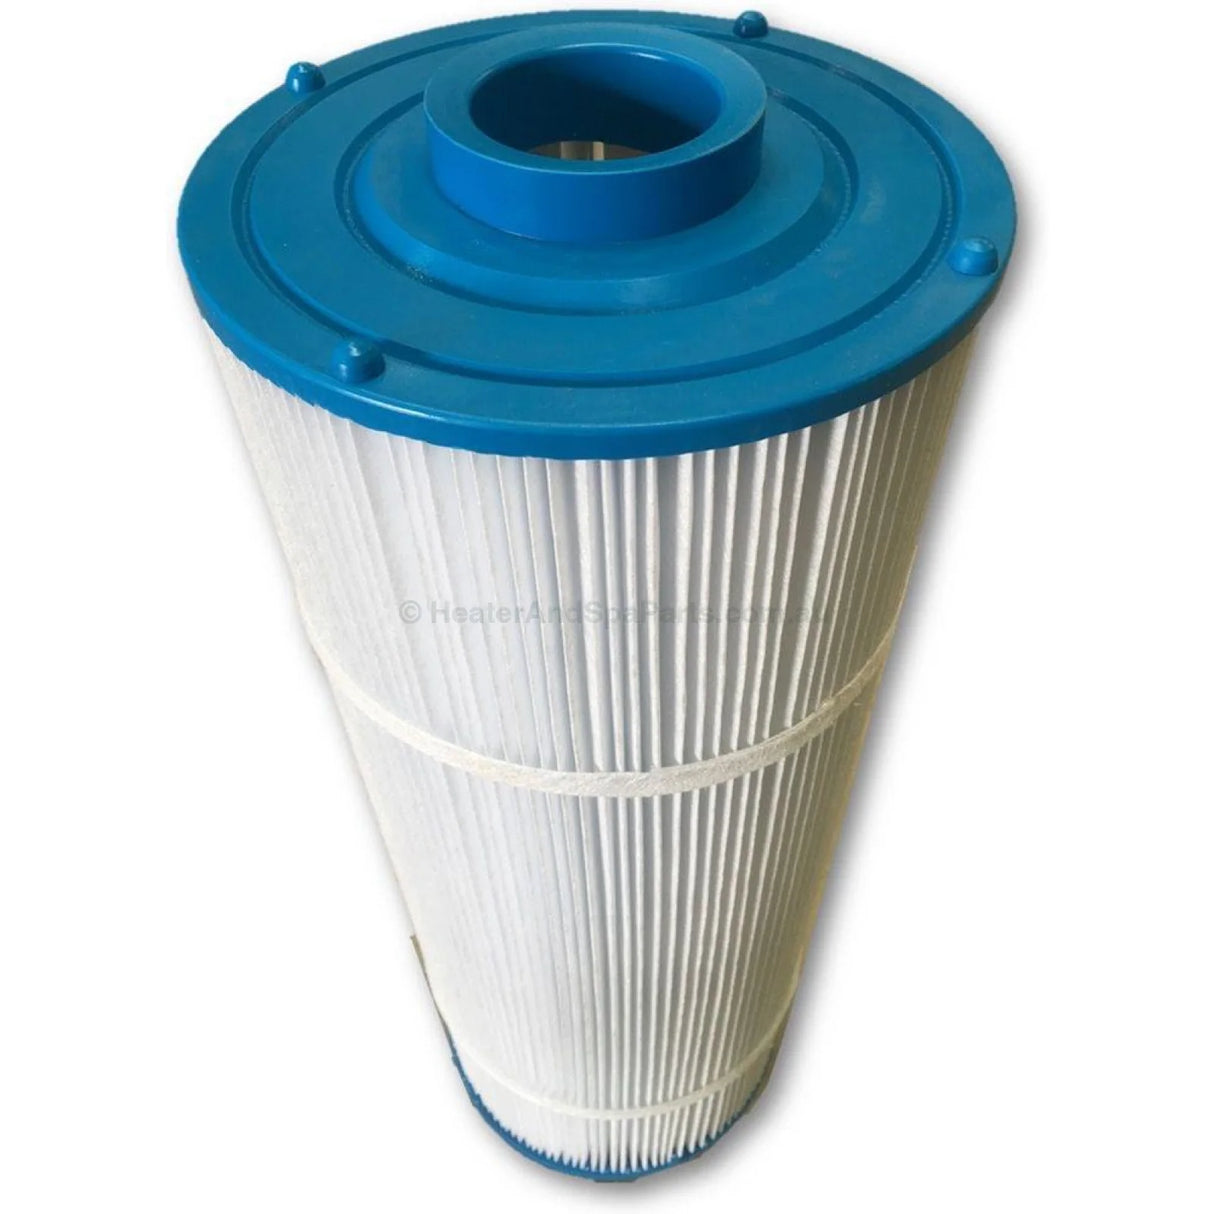 495mm X 185mm Poolrite CL55 CL75 Replacement Filter Cartridge - Heater and Spa Parts